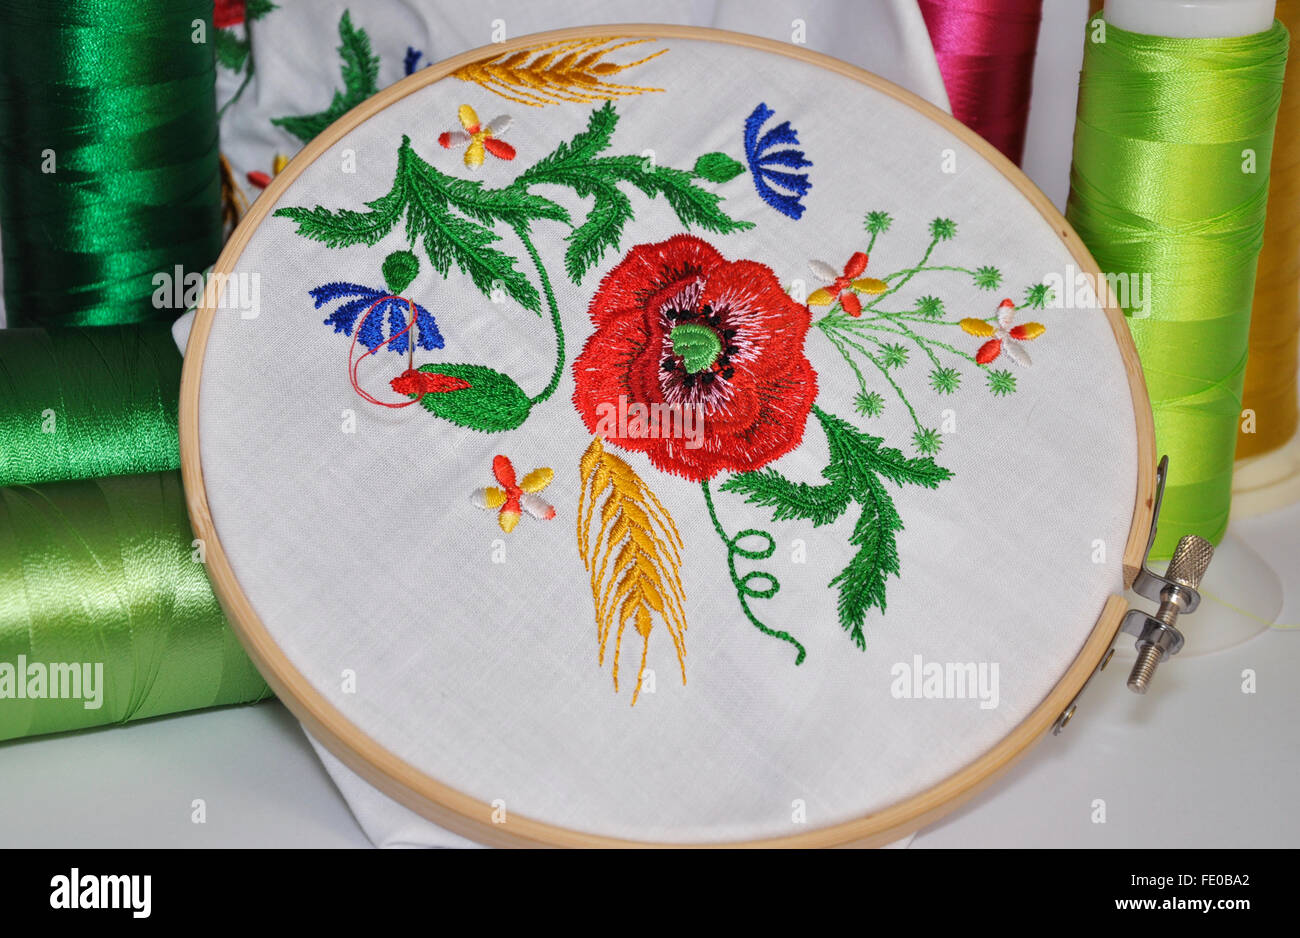 Fragment Of Fabric With Traditional Handmade Wooden Cross Stitch Embroidery  Frame, Floral Ornament Stock Photo, Picture and Royalty Free Image. Image  64685622.